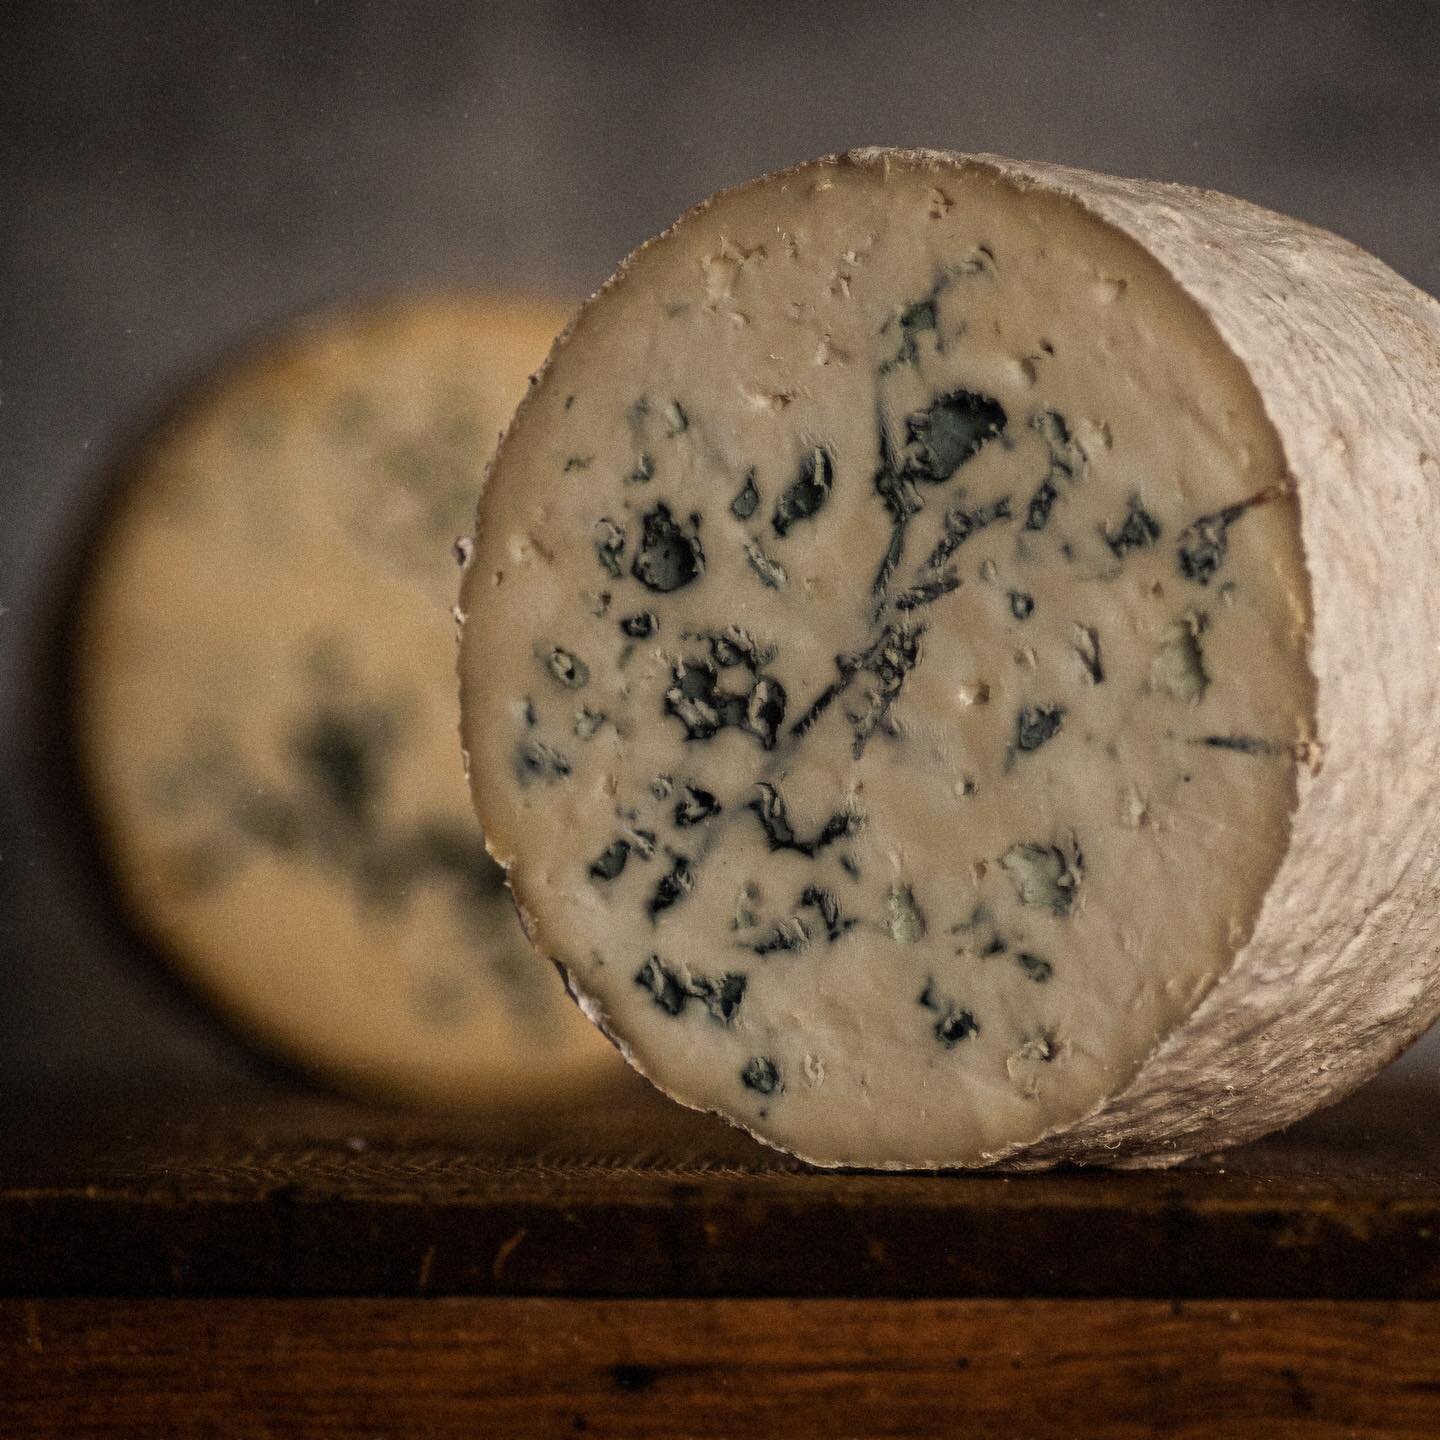 Bayley Hazen Blue is a cheese that we fall in love with over and over again.

It challenges us&mdash;occasionally like a rebellious teenager. But then, a few batches later, it softens and unfolds. Agrees with our goals and blooms into a cornucopia of